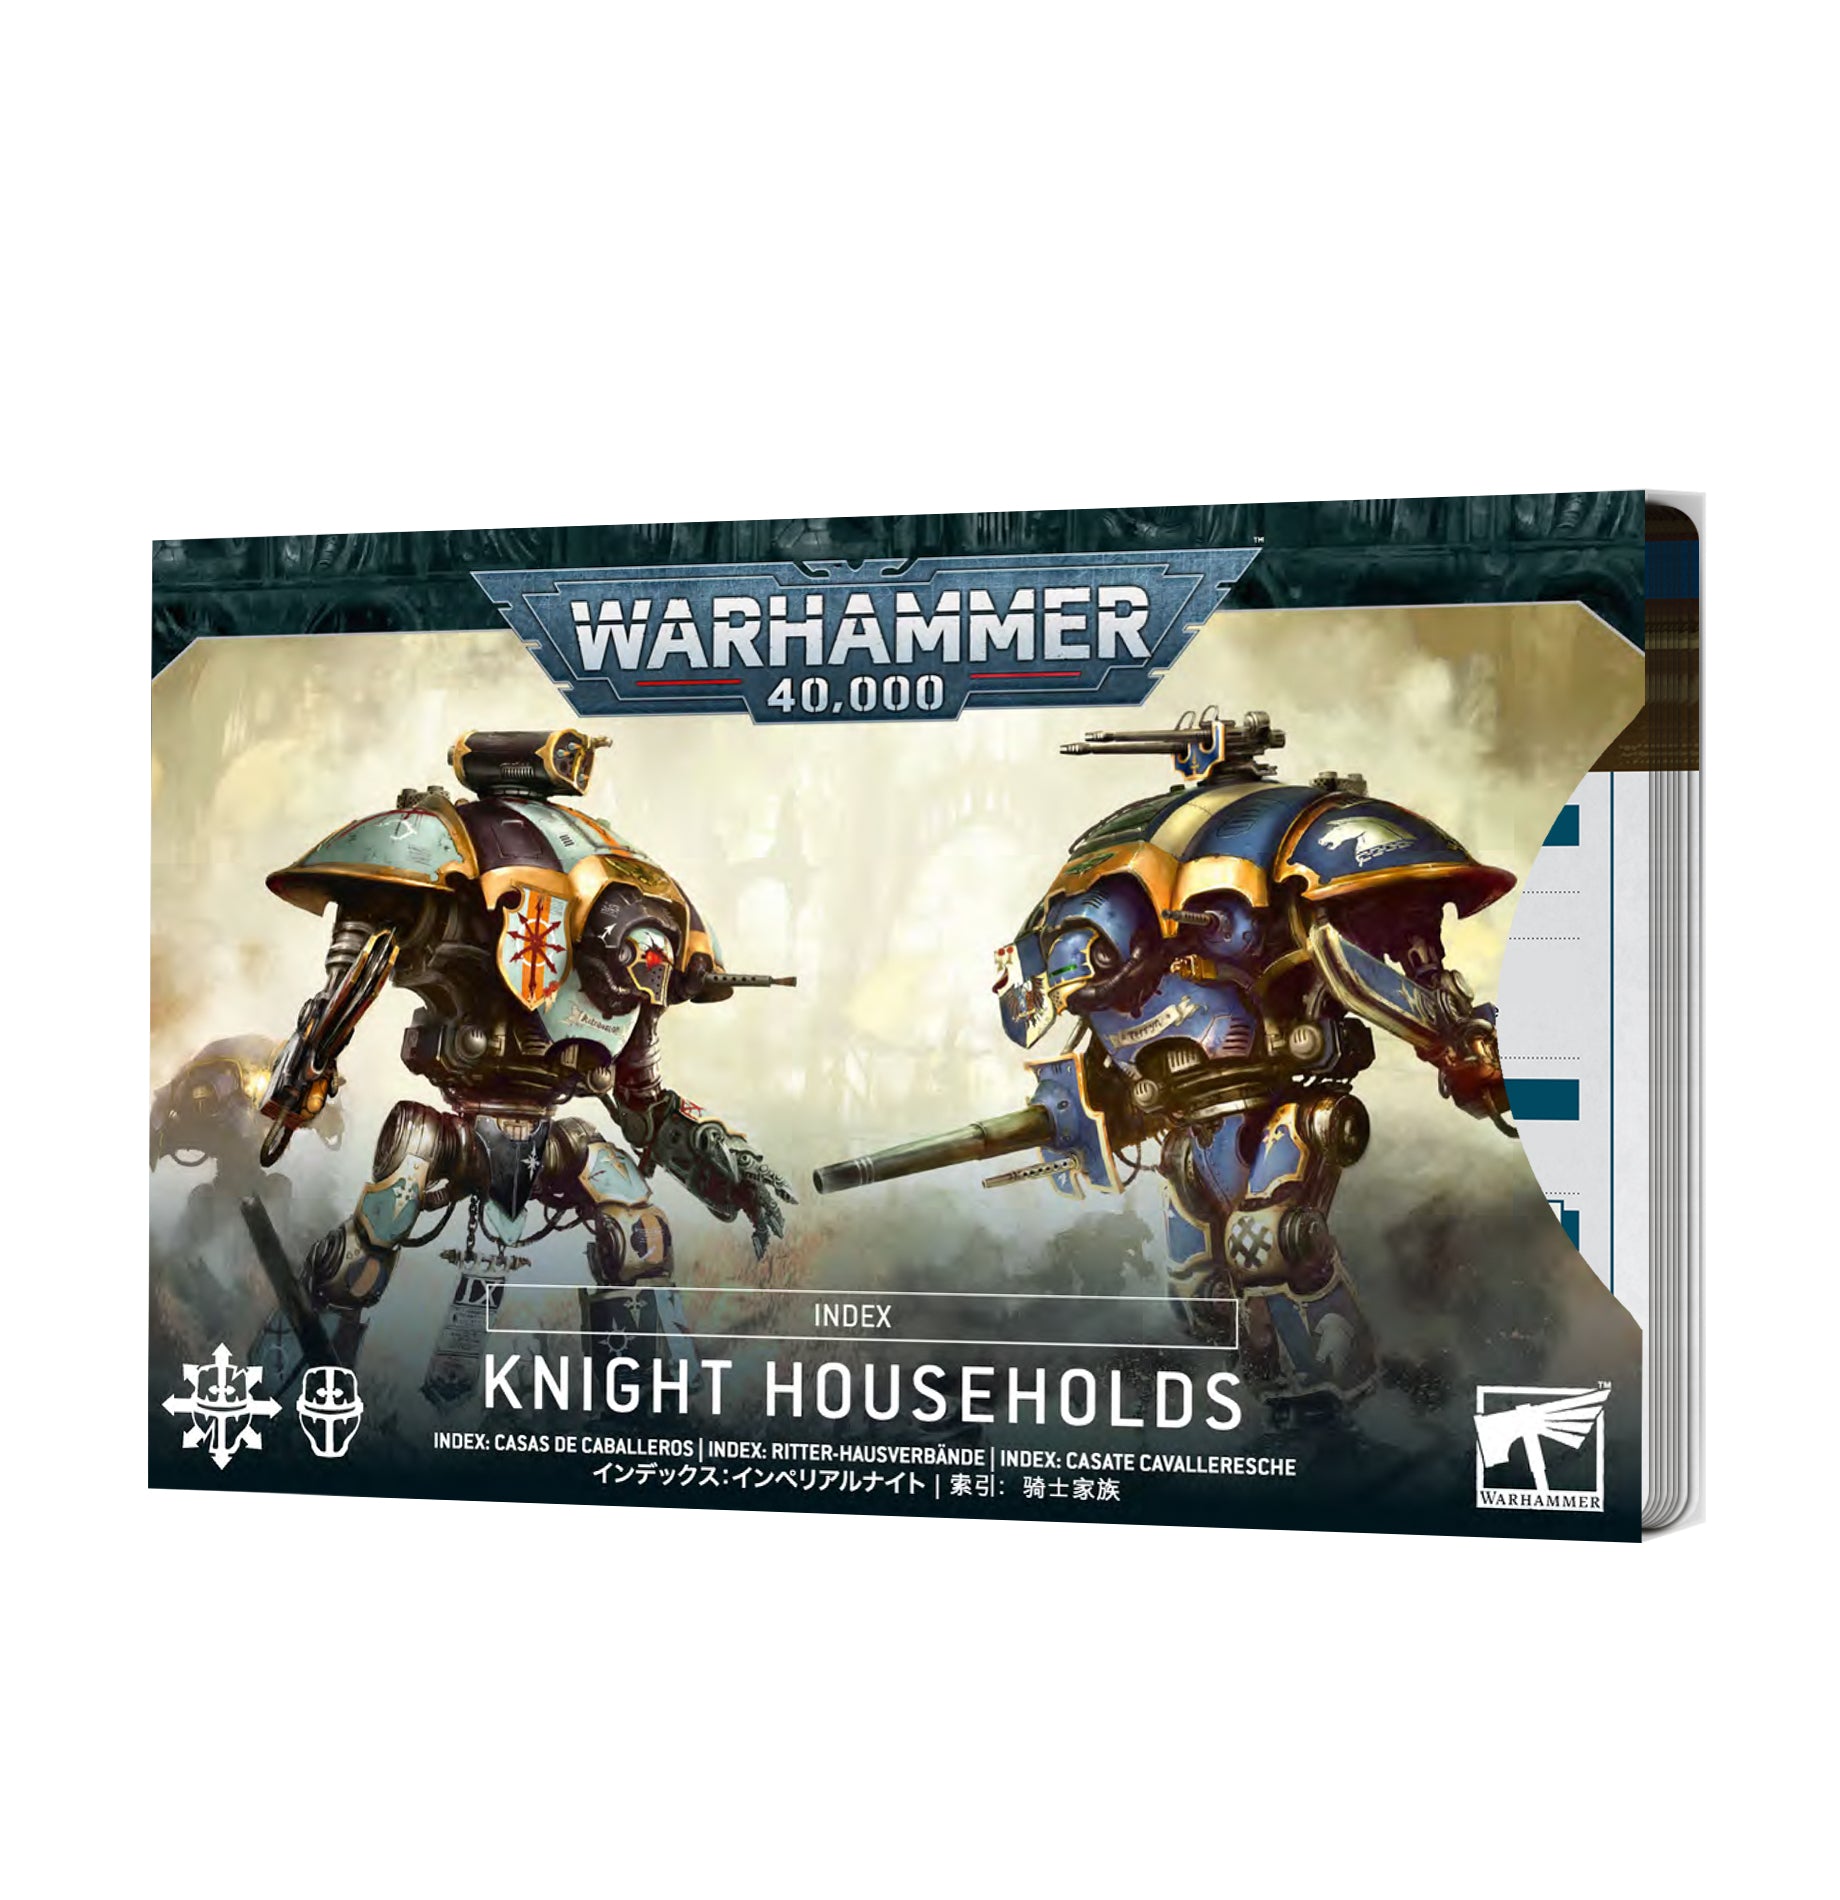 INDEX CARDS: Knight Households (ENG) Imperial Knights Games Workshop Default Title  